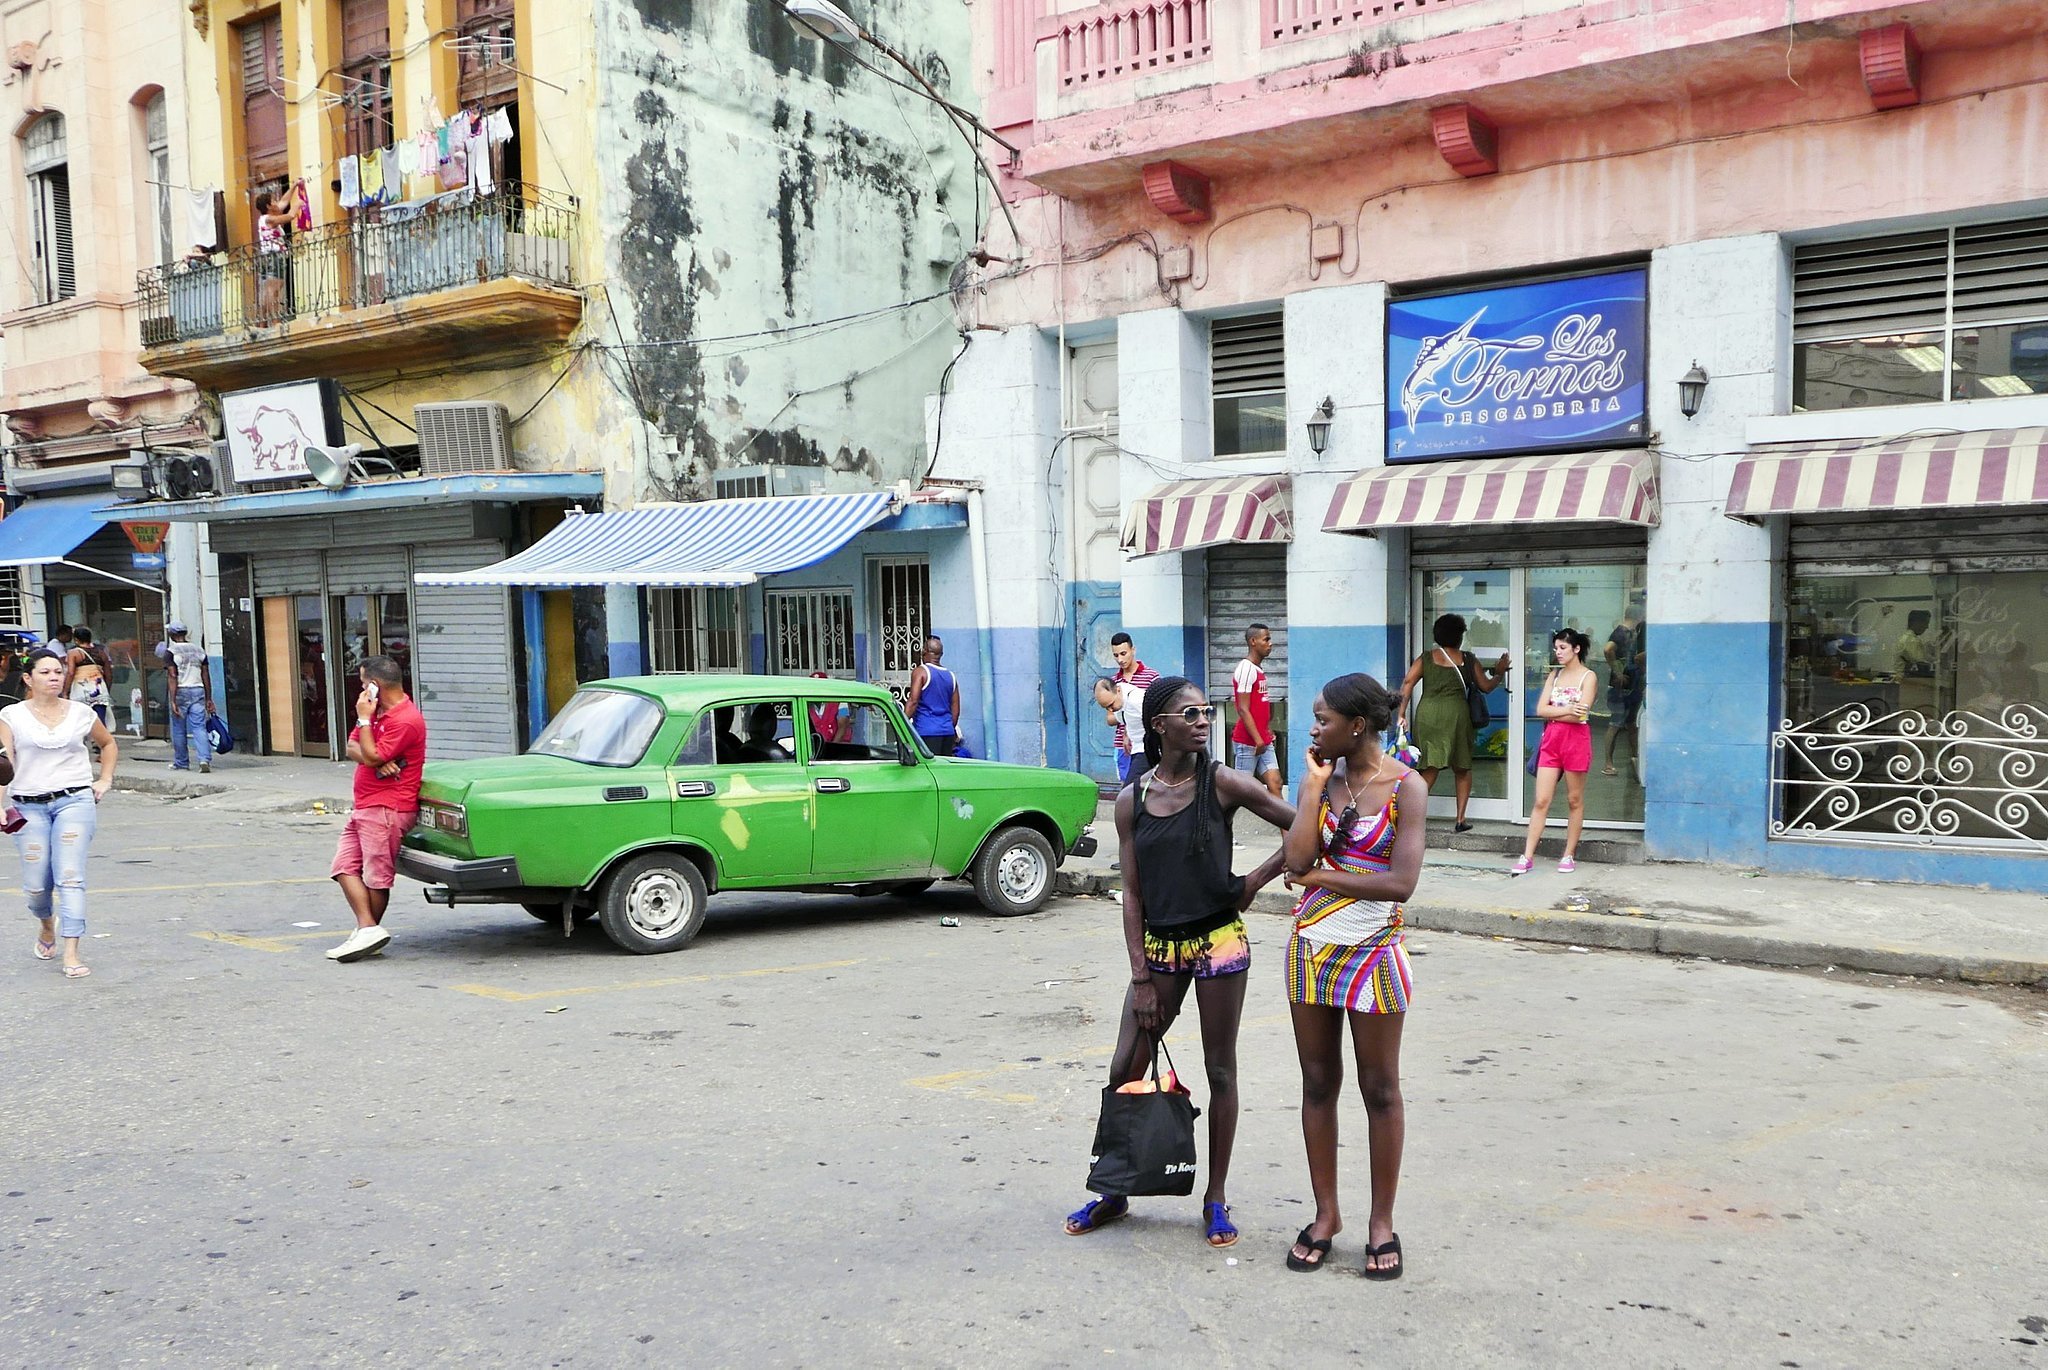 The Unbearable Significance of Chanel's Runway Show in Cuba.